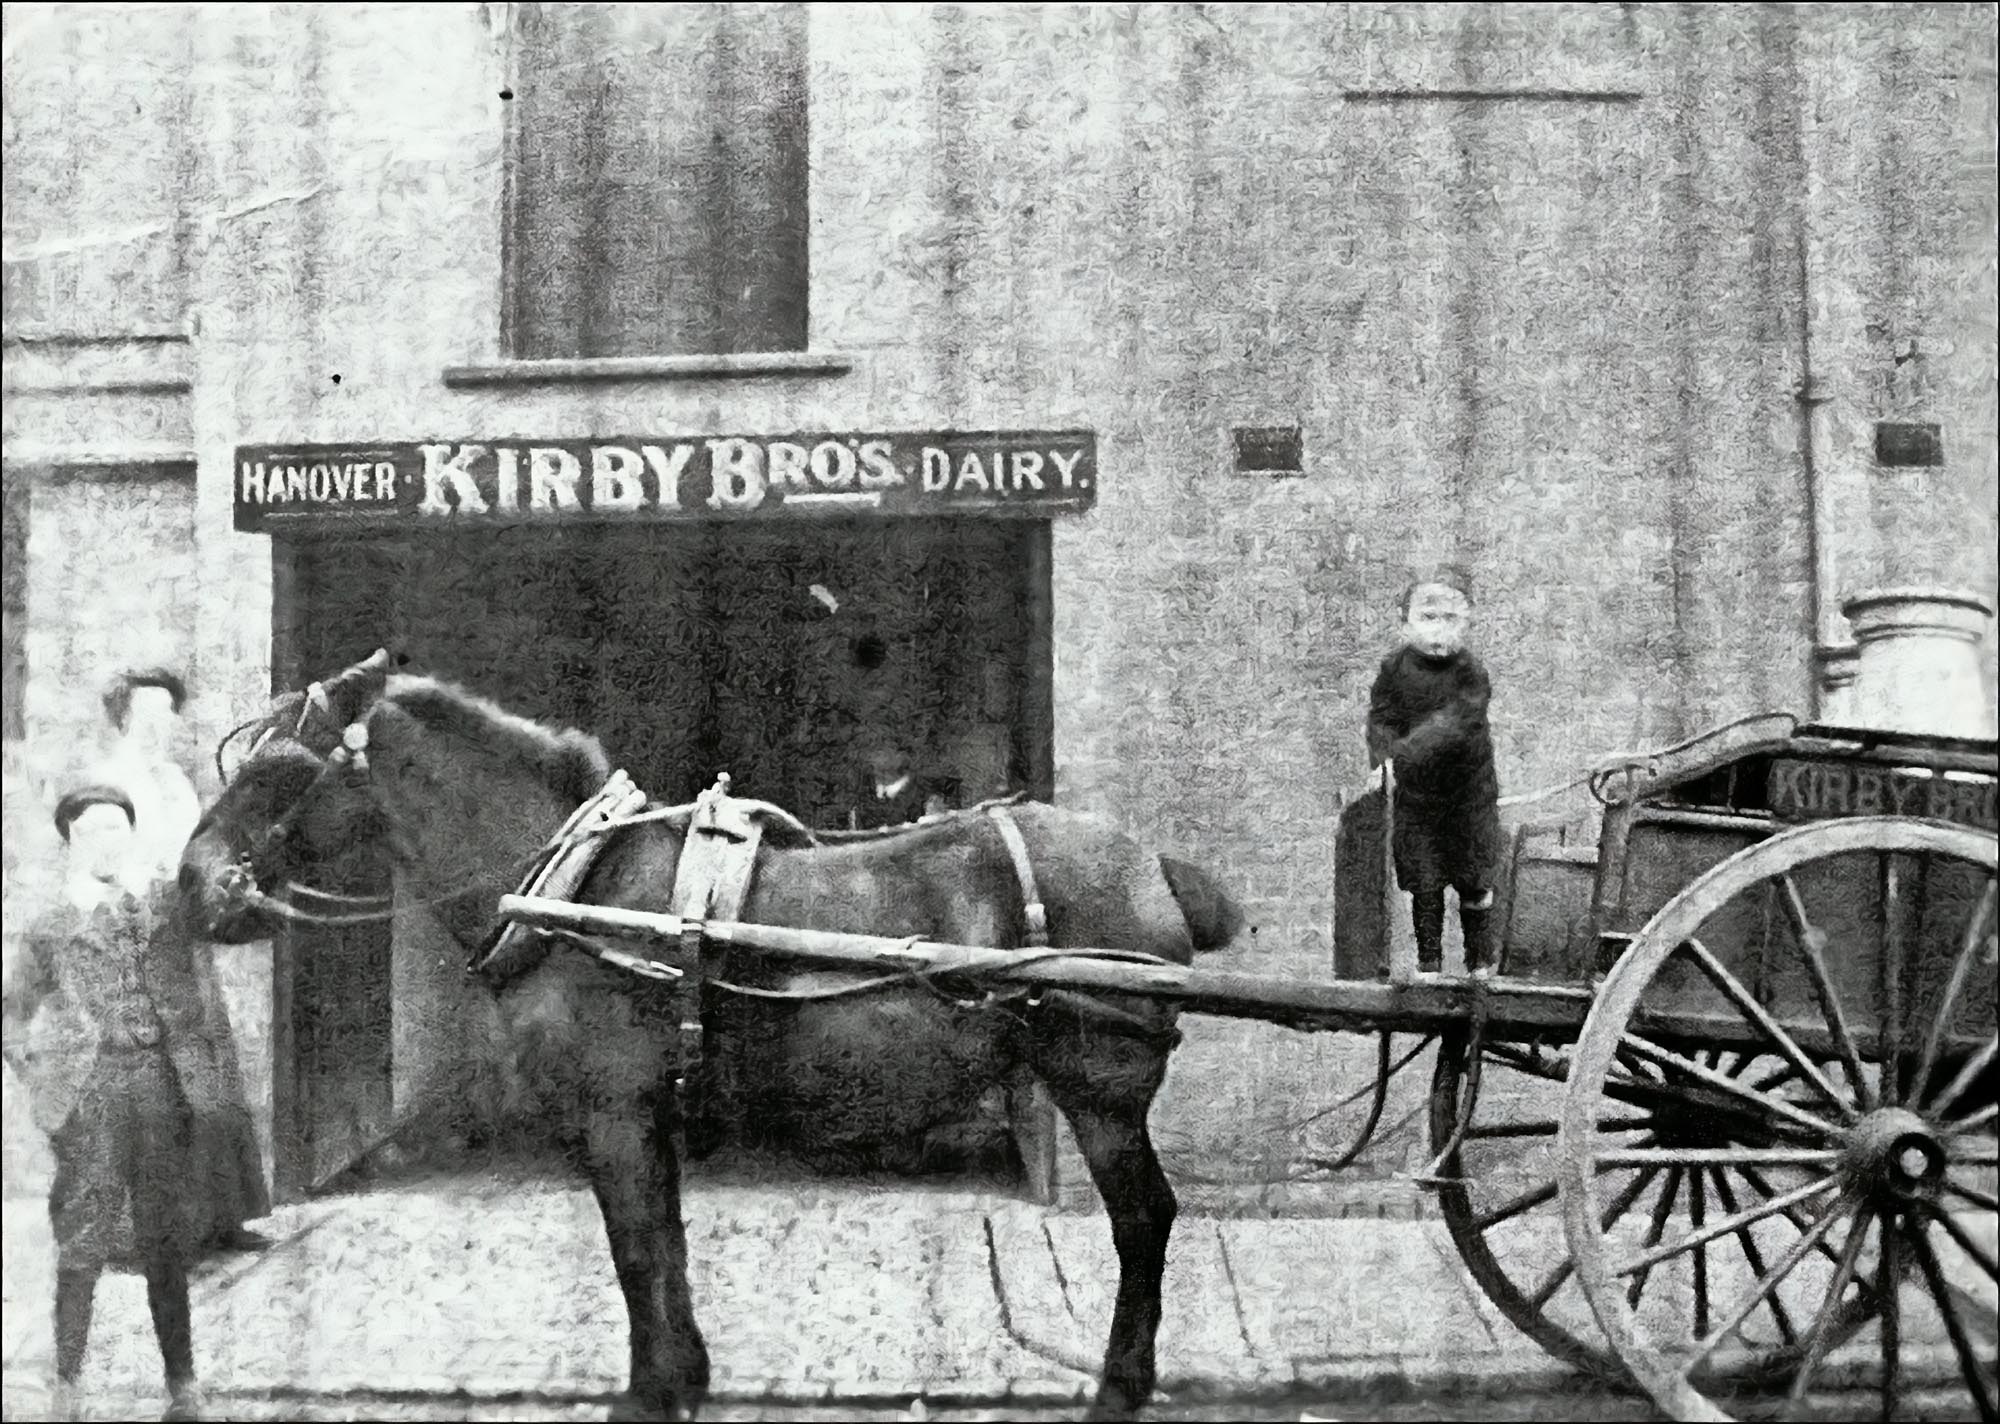 The dairy on Hanover Street, date unknown -